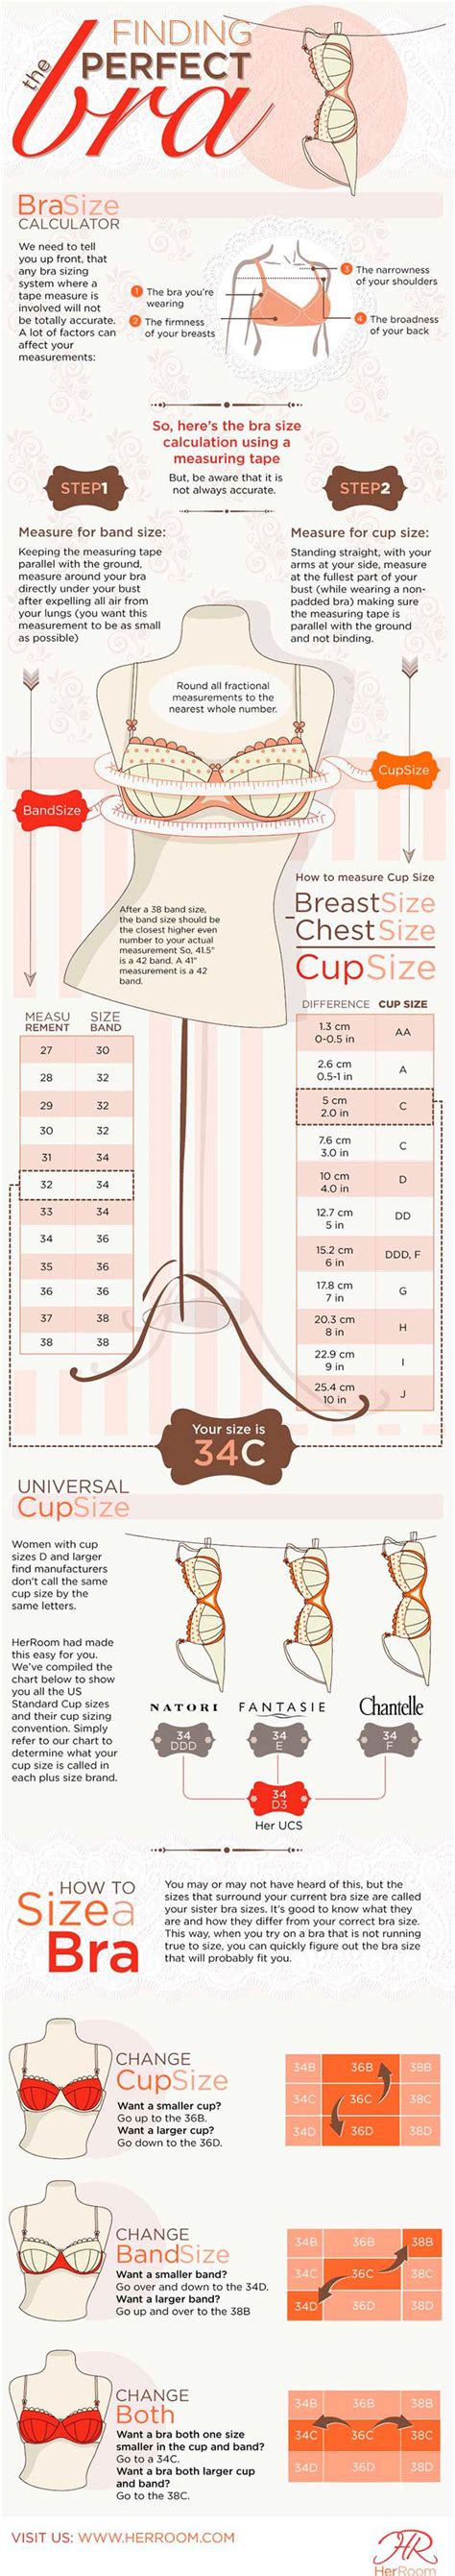 How To Know Your Cup Size In A Bra Bra Size Chart How To Measure